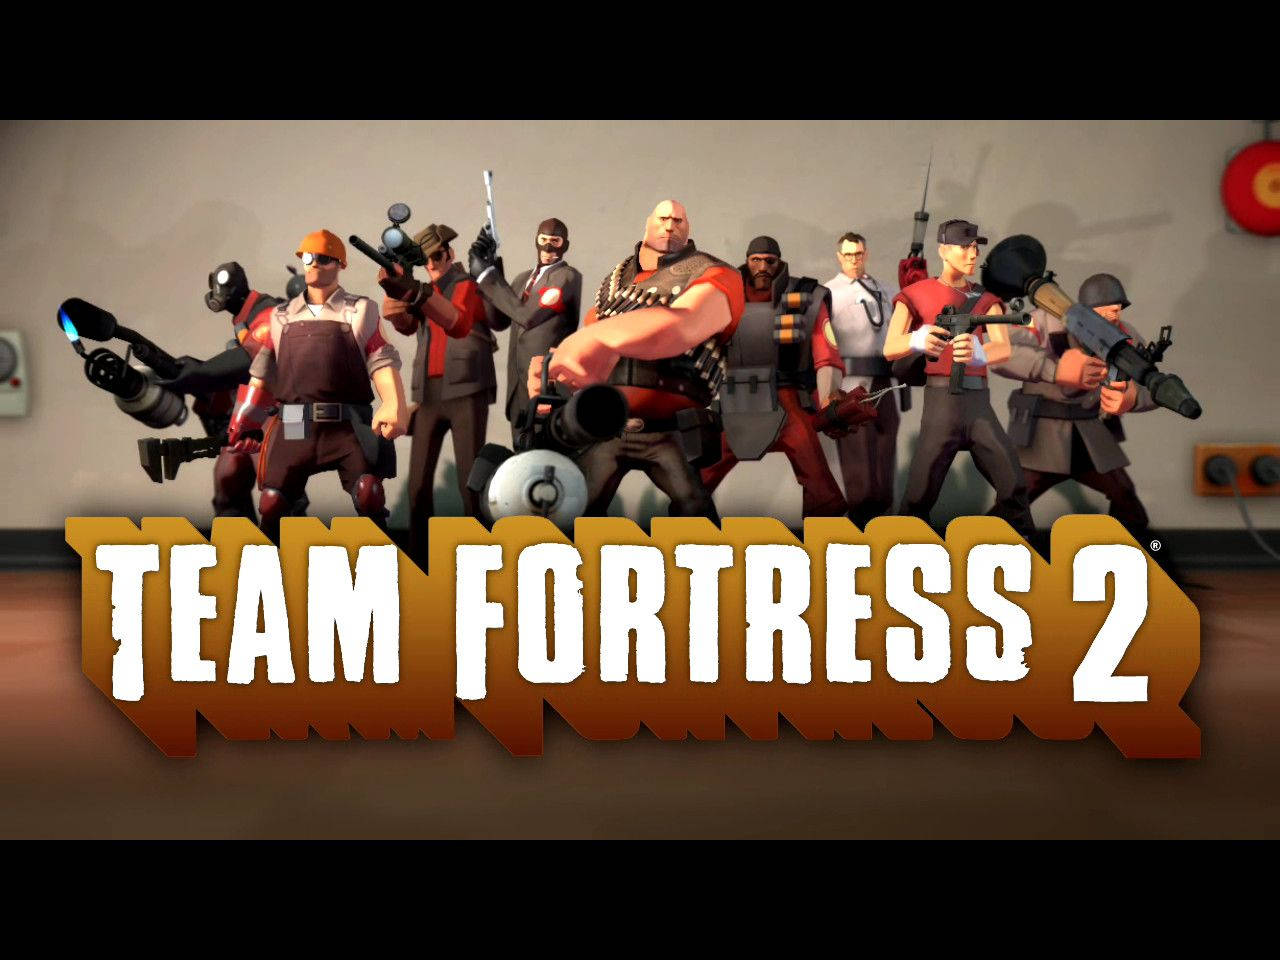 Team Fortress 2 Players Poster Wallpaper